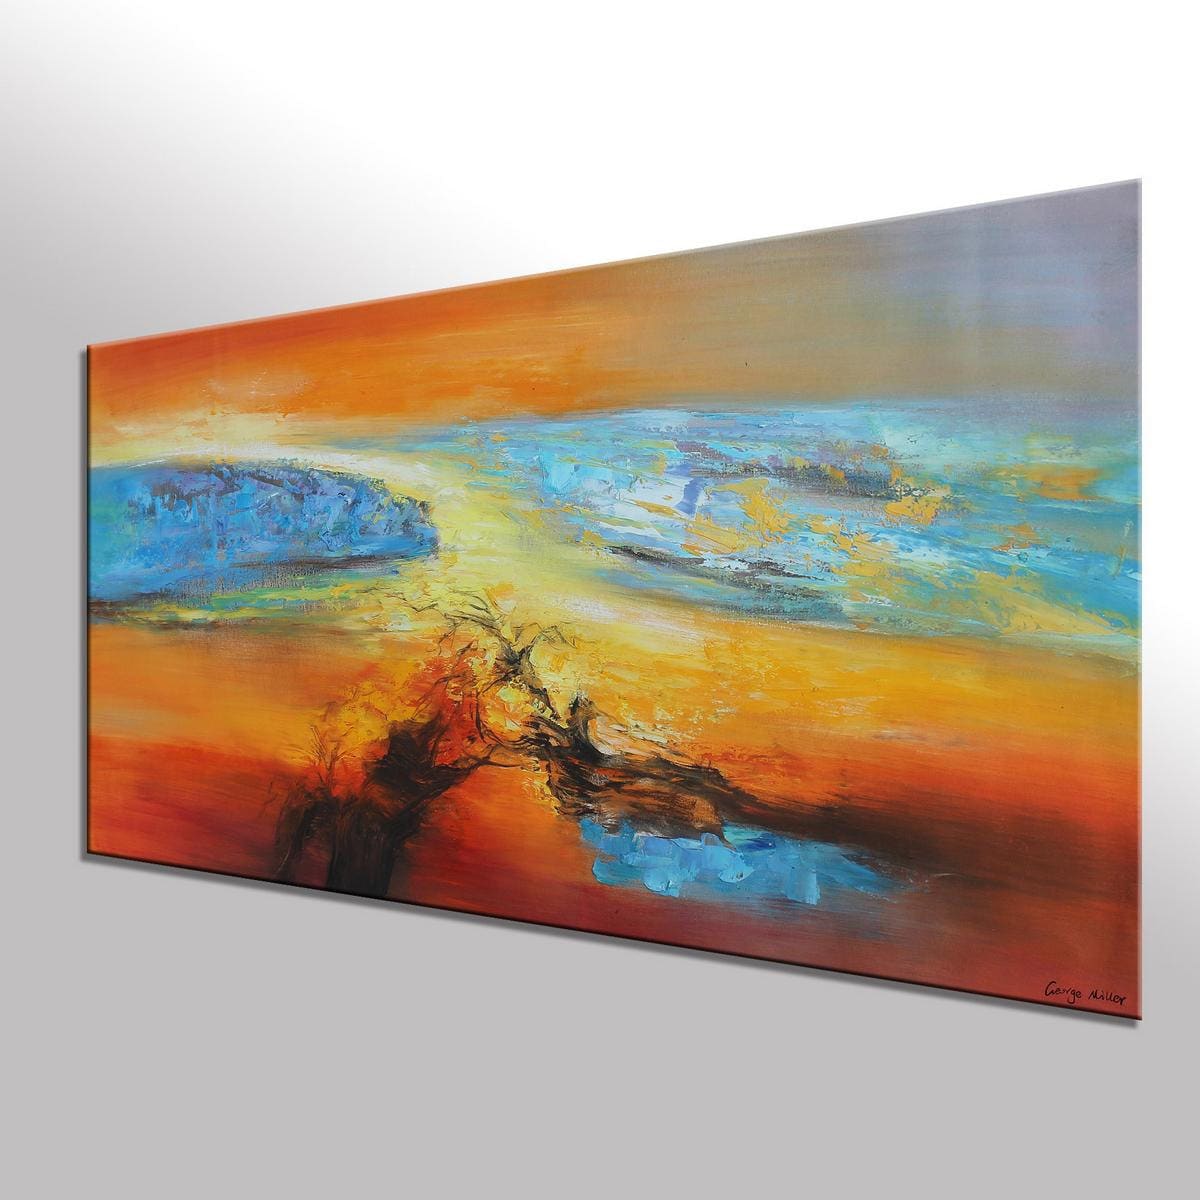 Abstract Painting, Modern Art, Wall Art, Abstract Canvas Art, Original Painting, Contemporary Painting, Large Abstract Art, Oil Painting